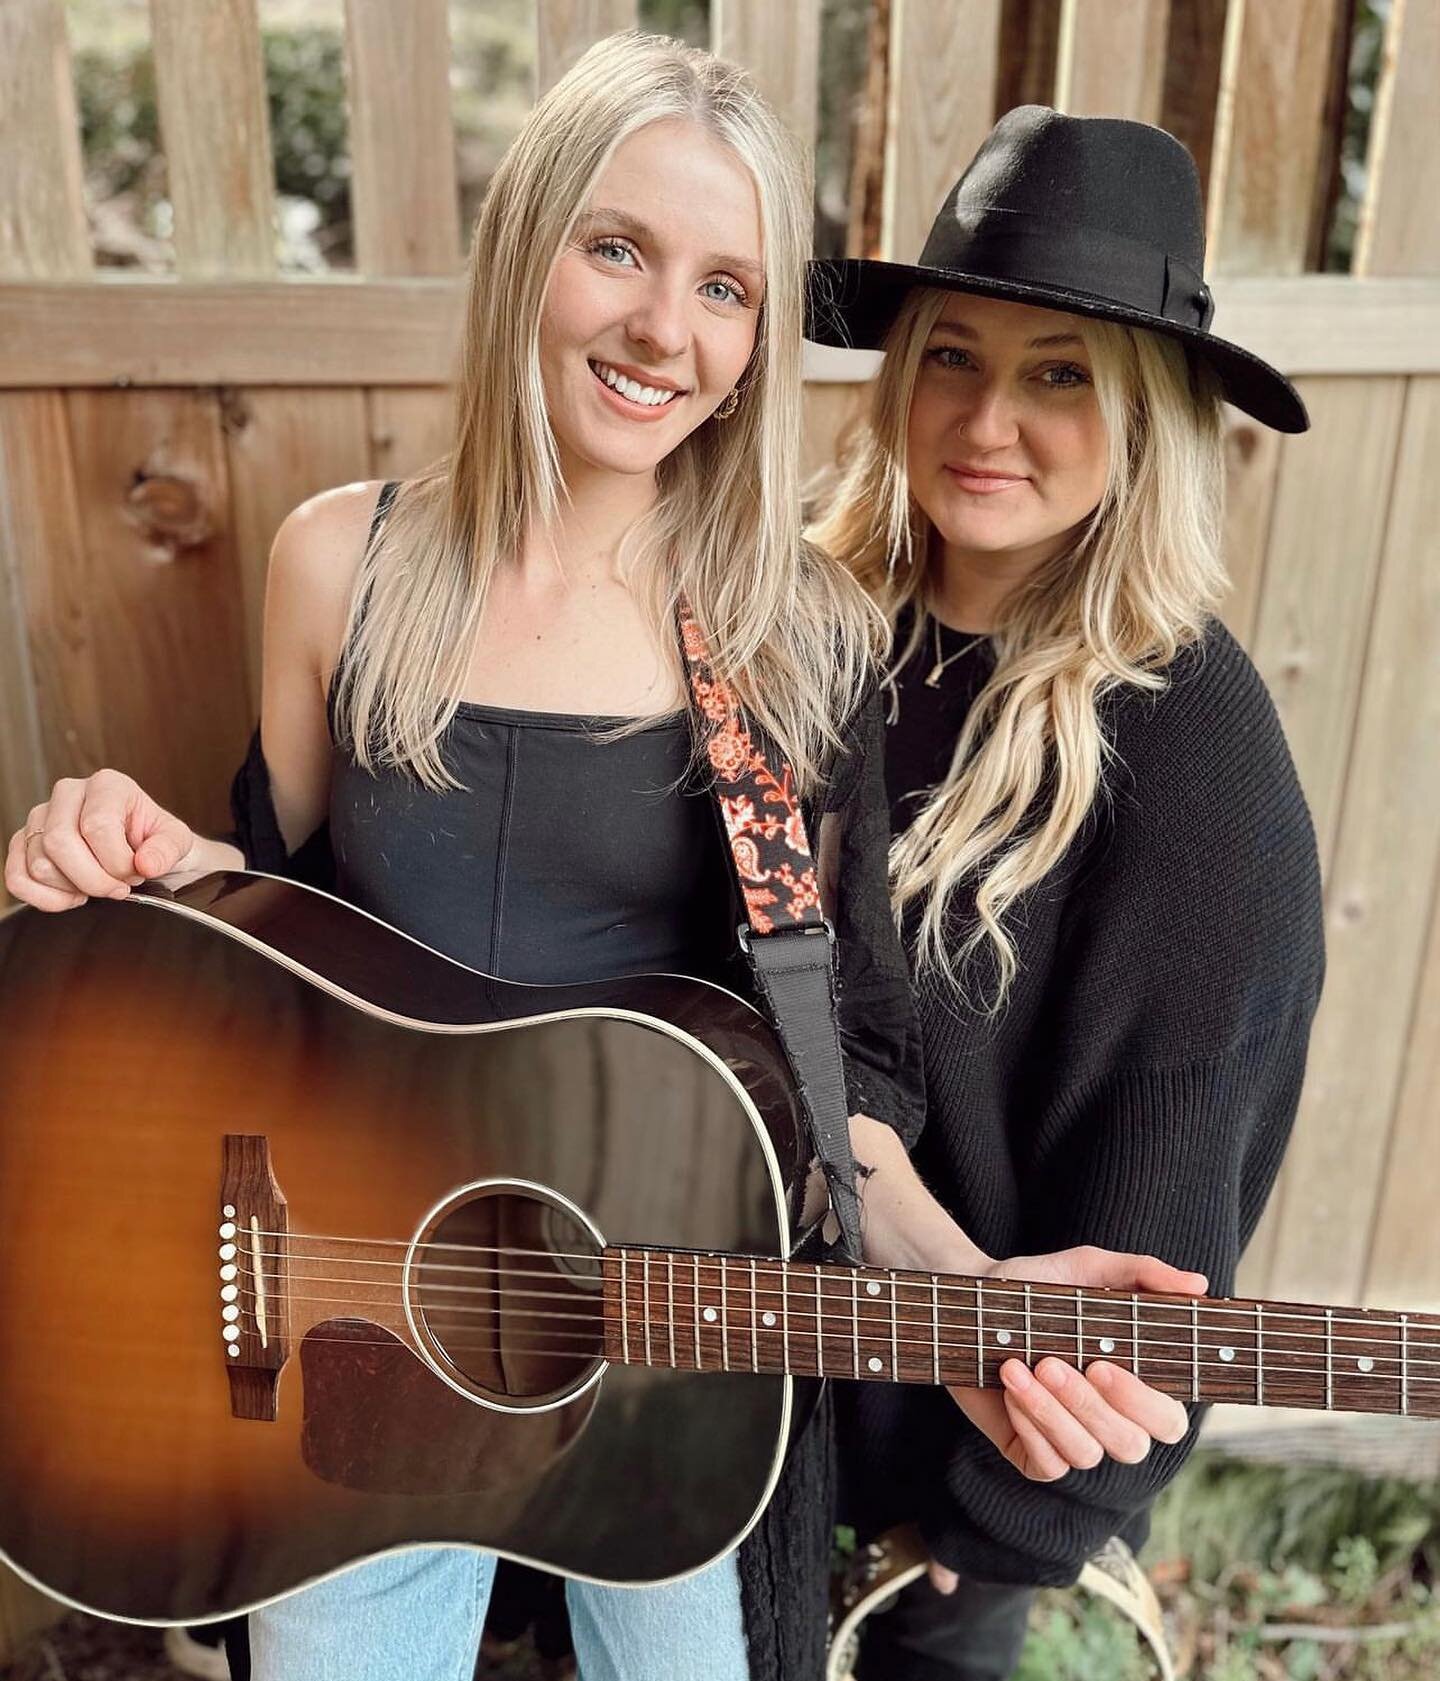 Tonight we have @jaimesonrhy duo playing for acoustic sessions 🎶 come down, enjoy some drinks &amp; listen to great music 🍻 

#tuesdaynight #acousticsessions #acoustic #music #livemusic #downtownvictoria